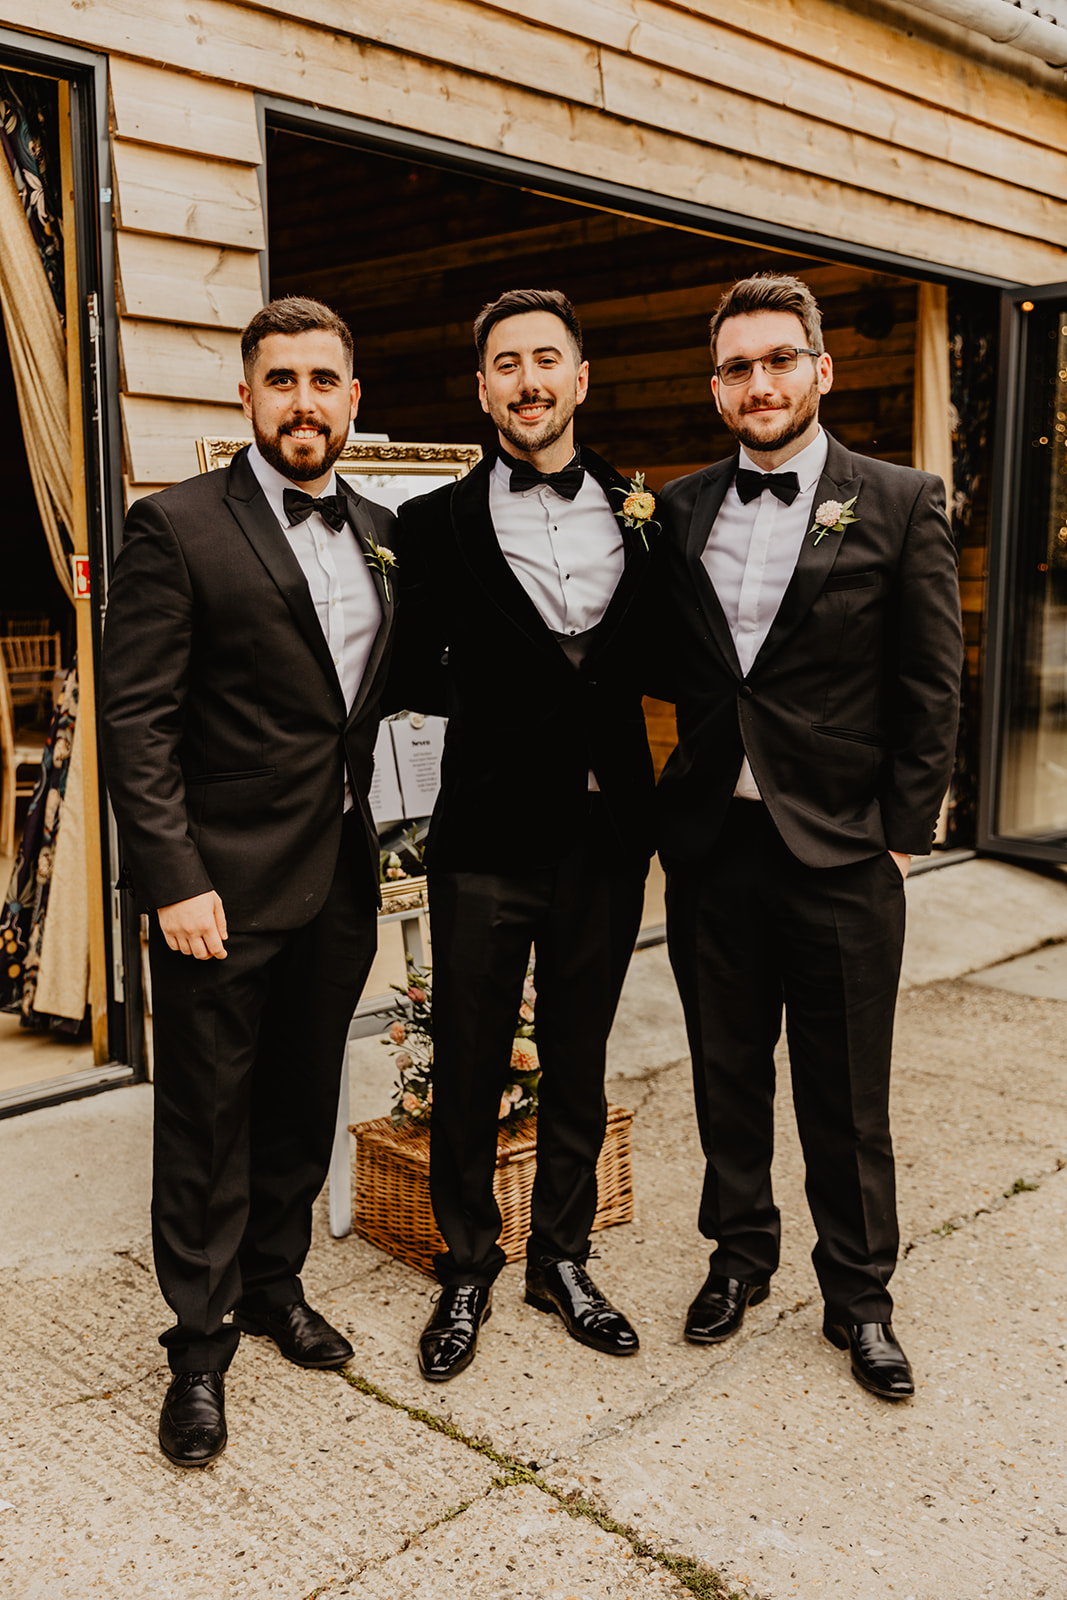 Groom and groomsmen at a Southlands barn wedding, Sussex. Photo by OliveJoy Photography.